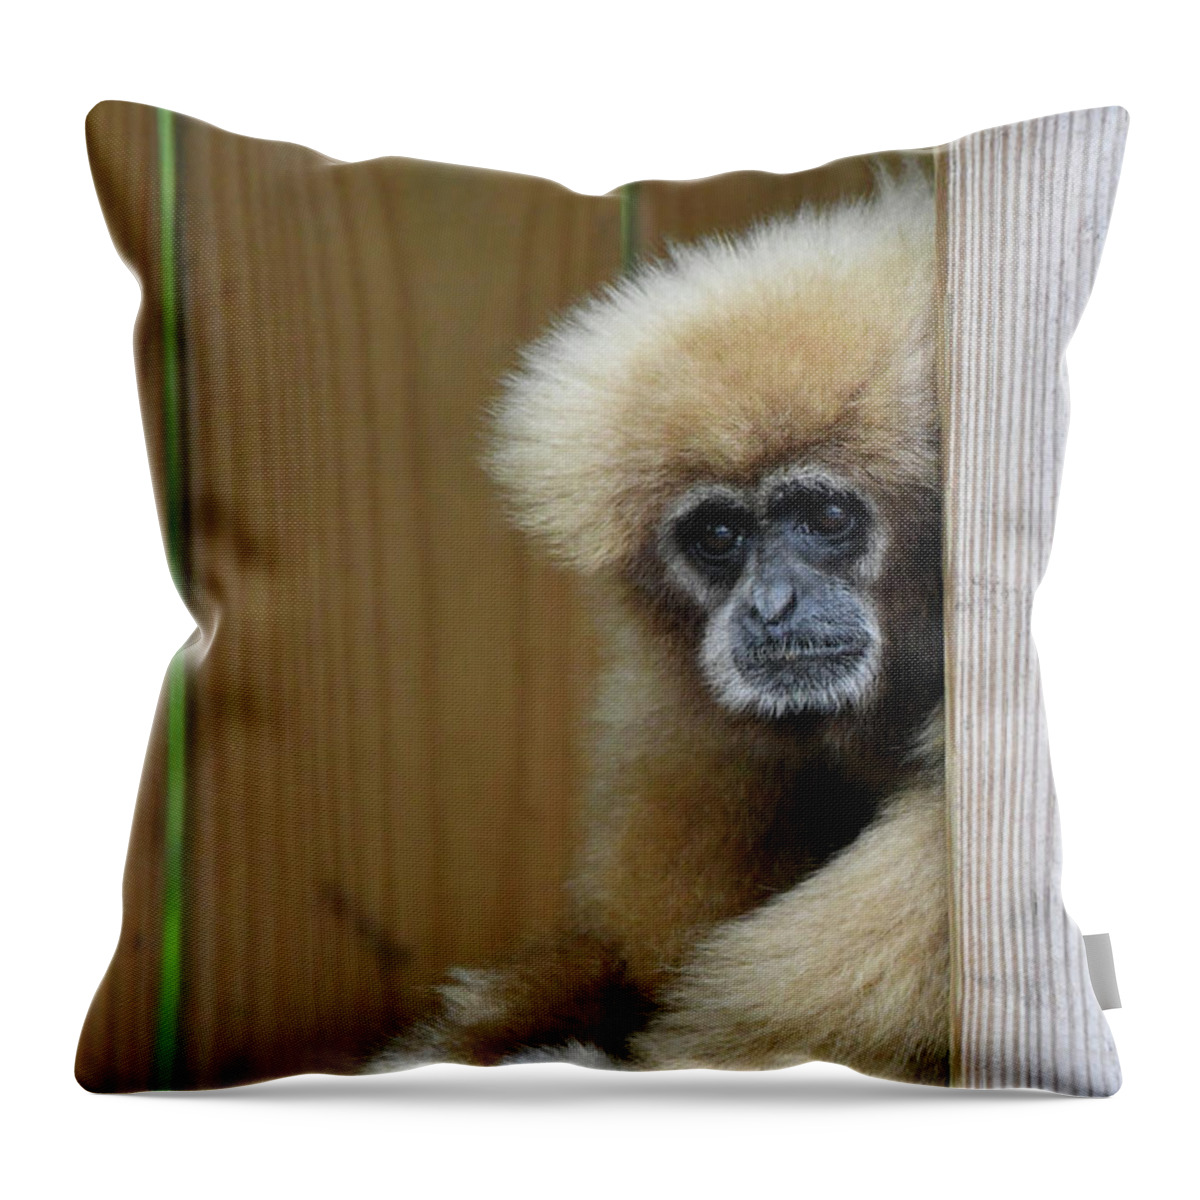 Monkey Throw Pillow featuring the photograph Thoughtful by Artful Imagery